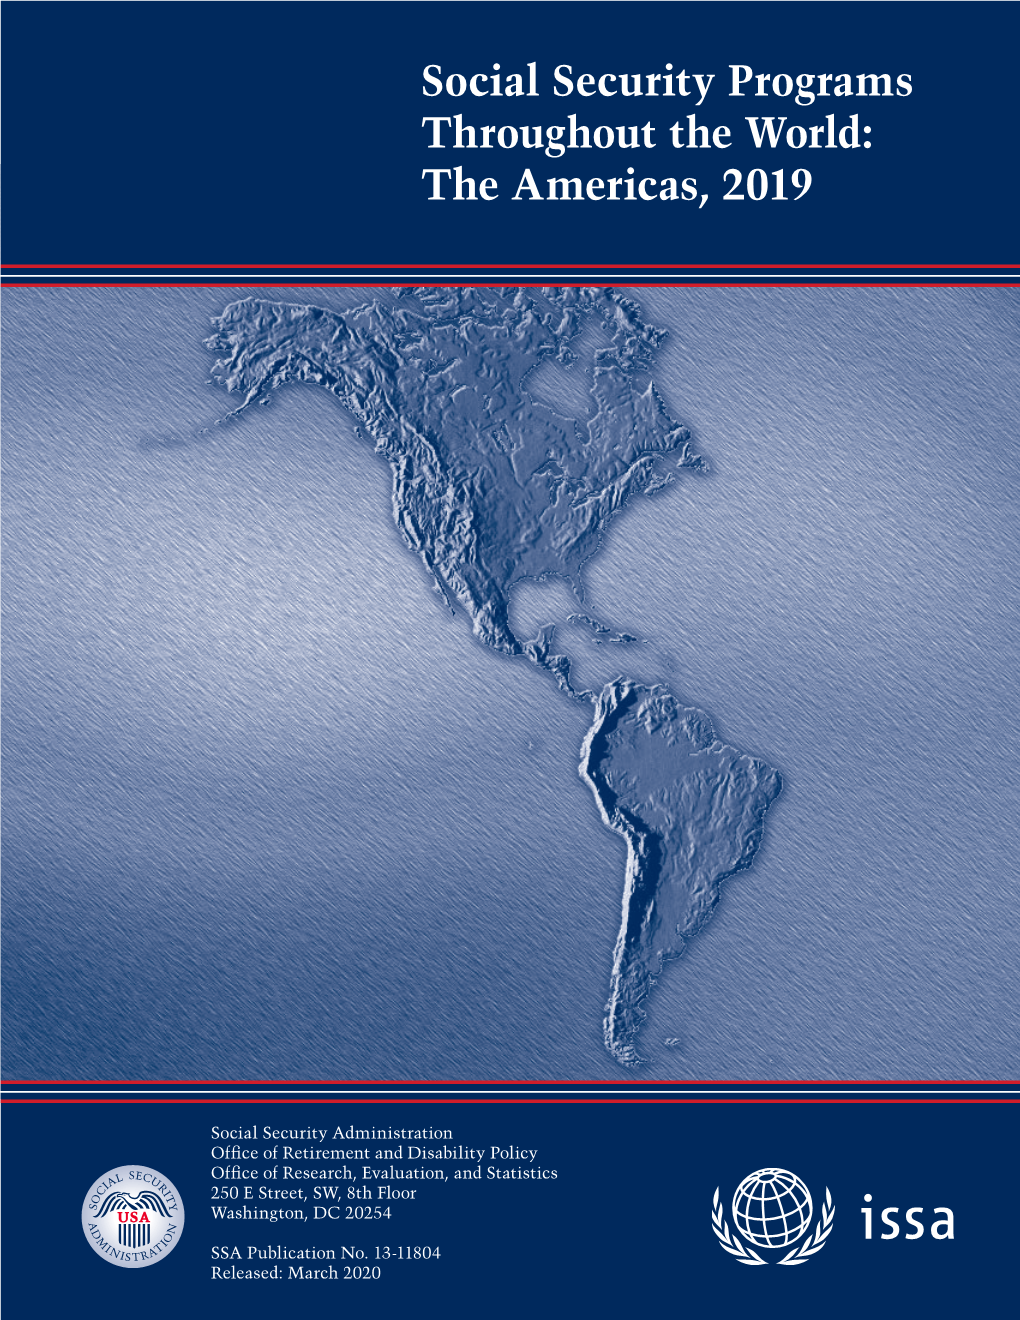 Social Security Programs Throughout the World: the Americas, 2019, P. 1